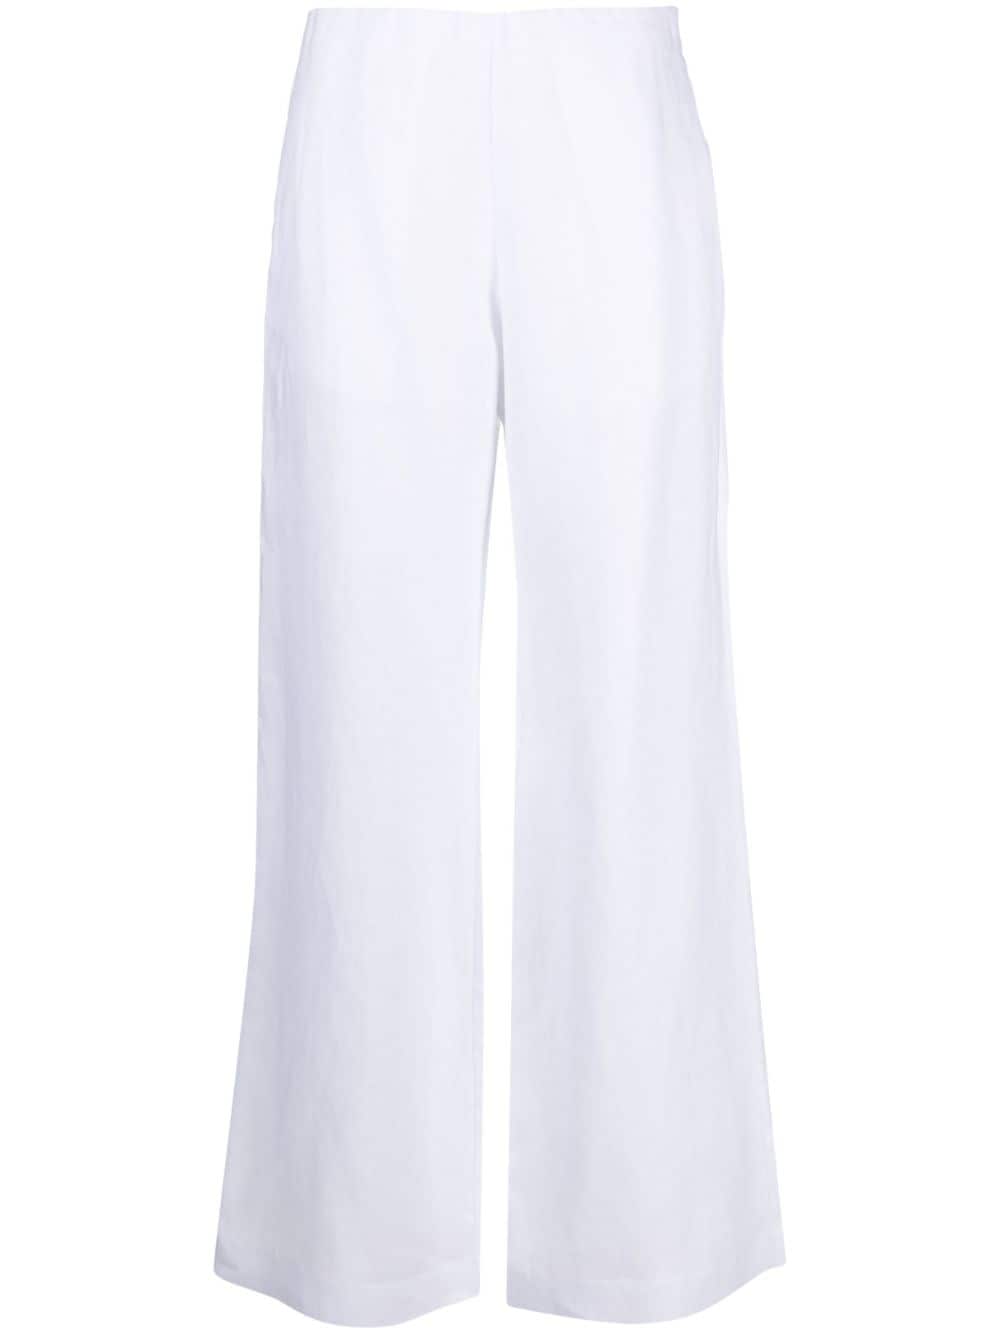 Off White Linen Look Wide Leg Trousers  New Look